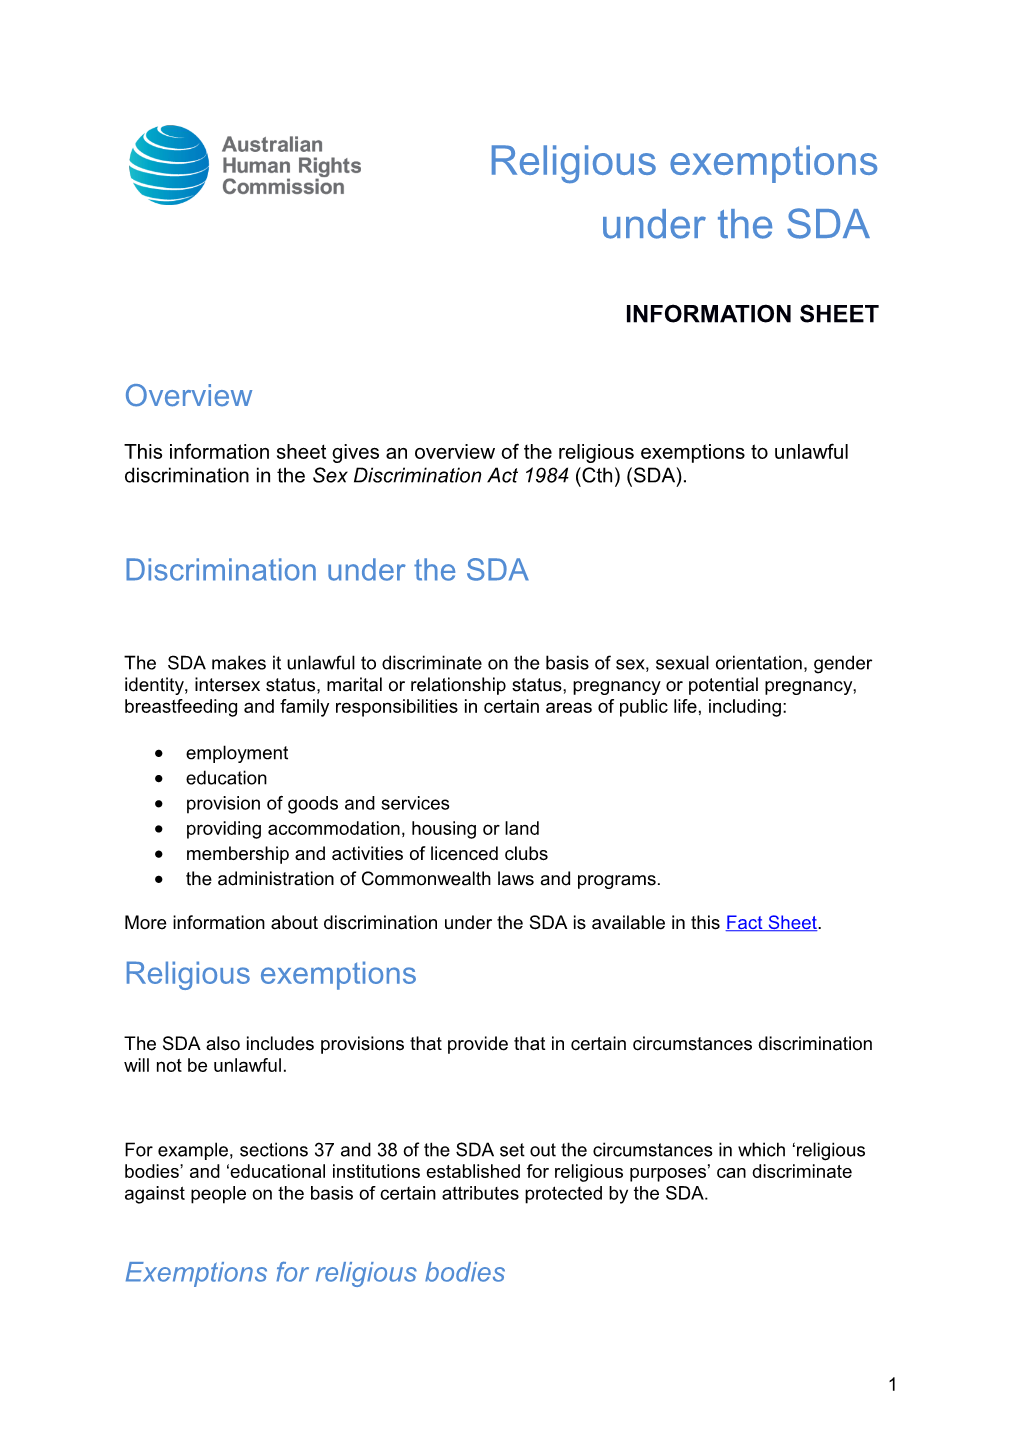 This Information Sheet Gives an Overview of the Religious Exemptions to Unlawful Discrimination